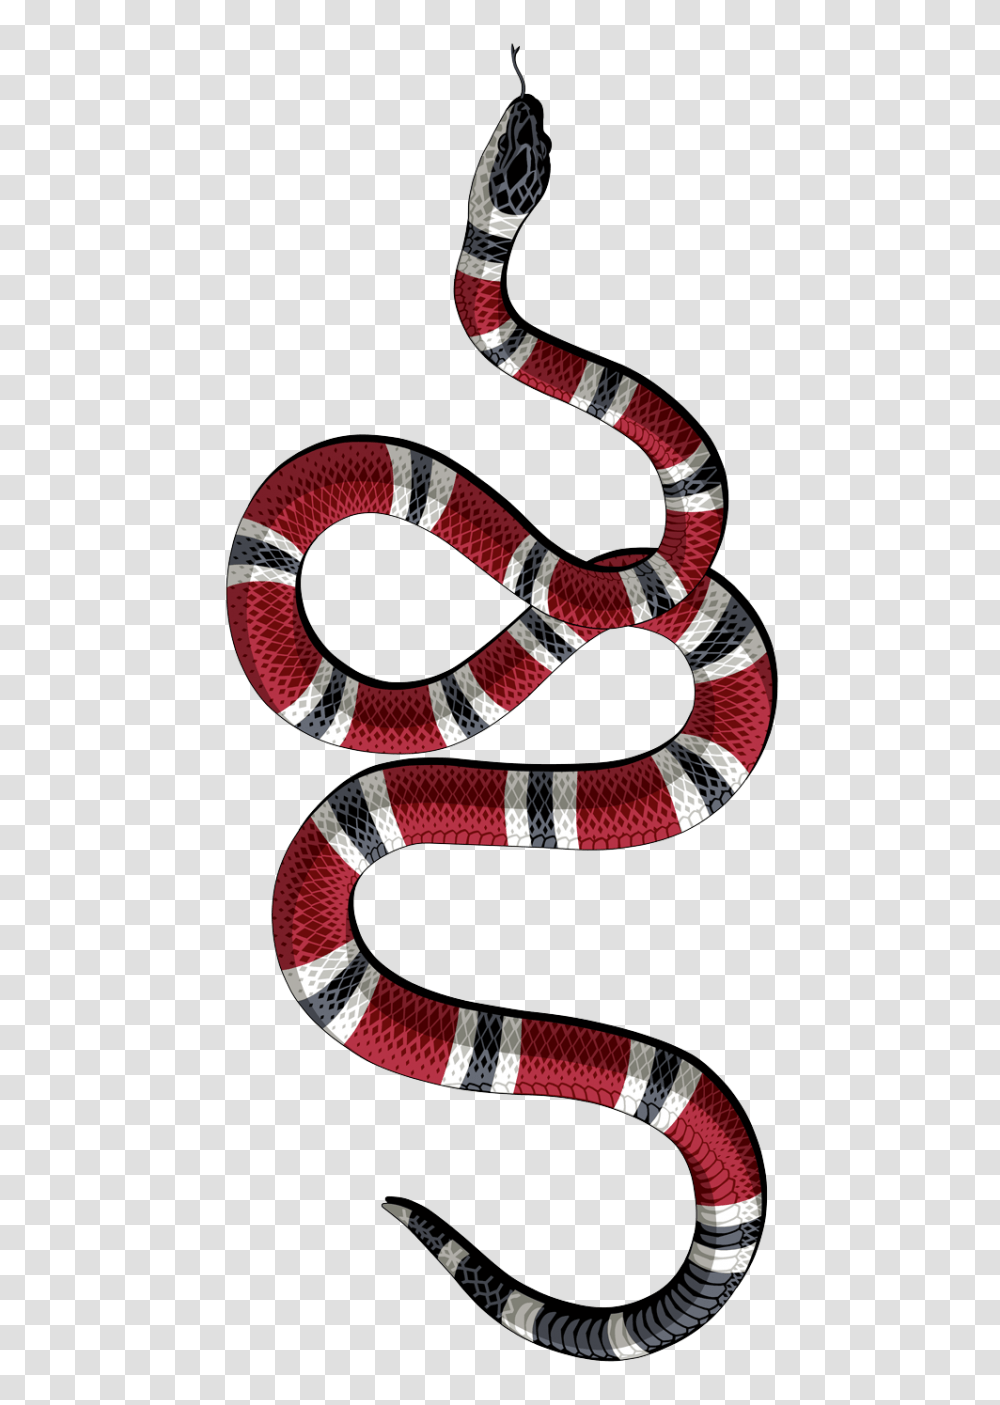 Decal Kingsnakes Gucci Sticker Serpent Gucci Decal On Car, King Snake, Reptile, Animal Transparent Png